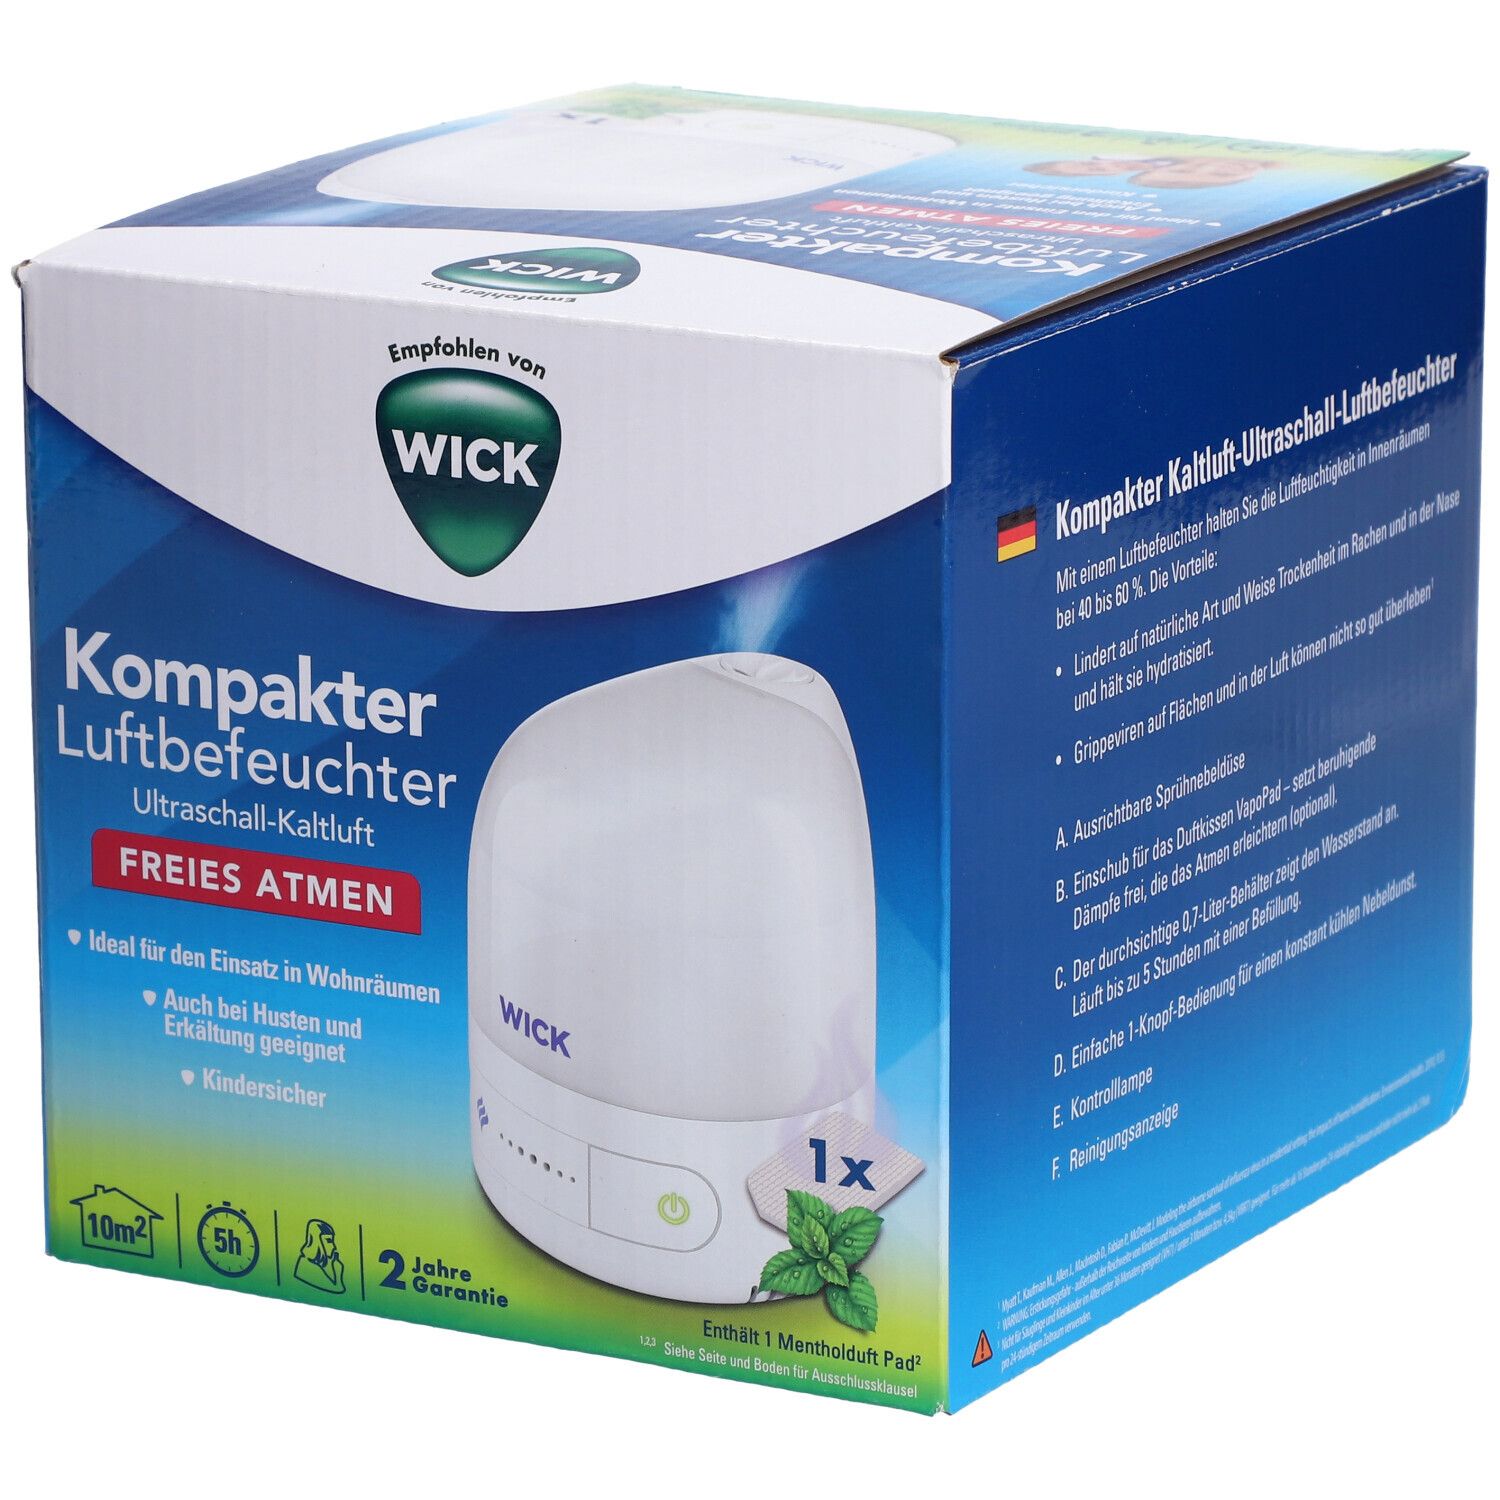 Wick of compact humidifier